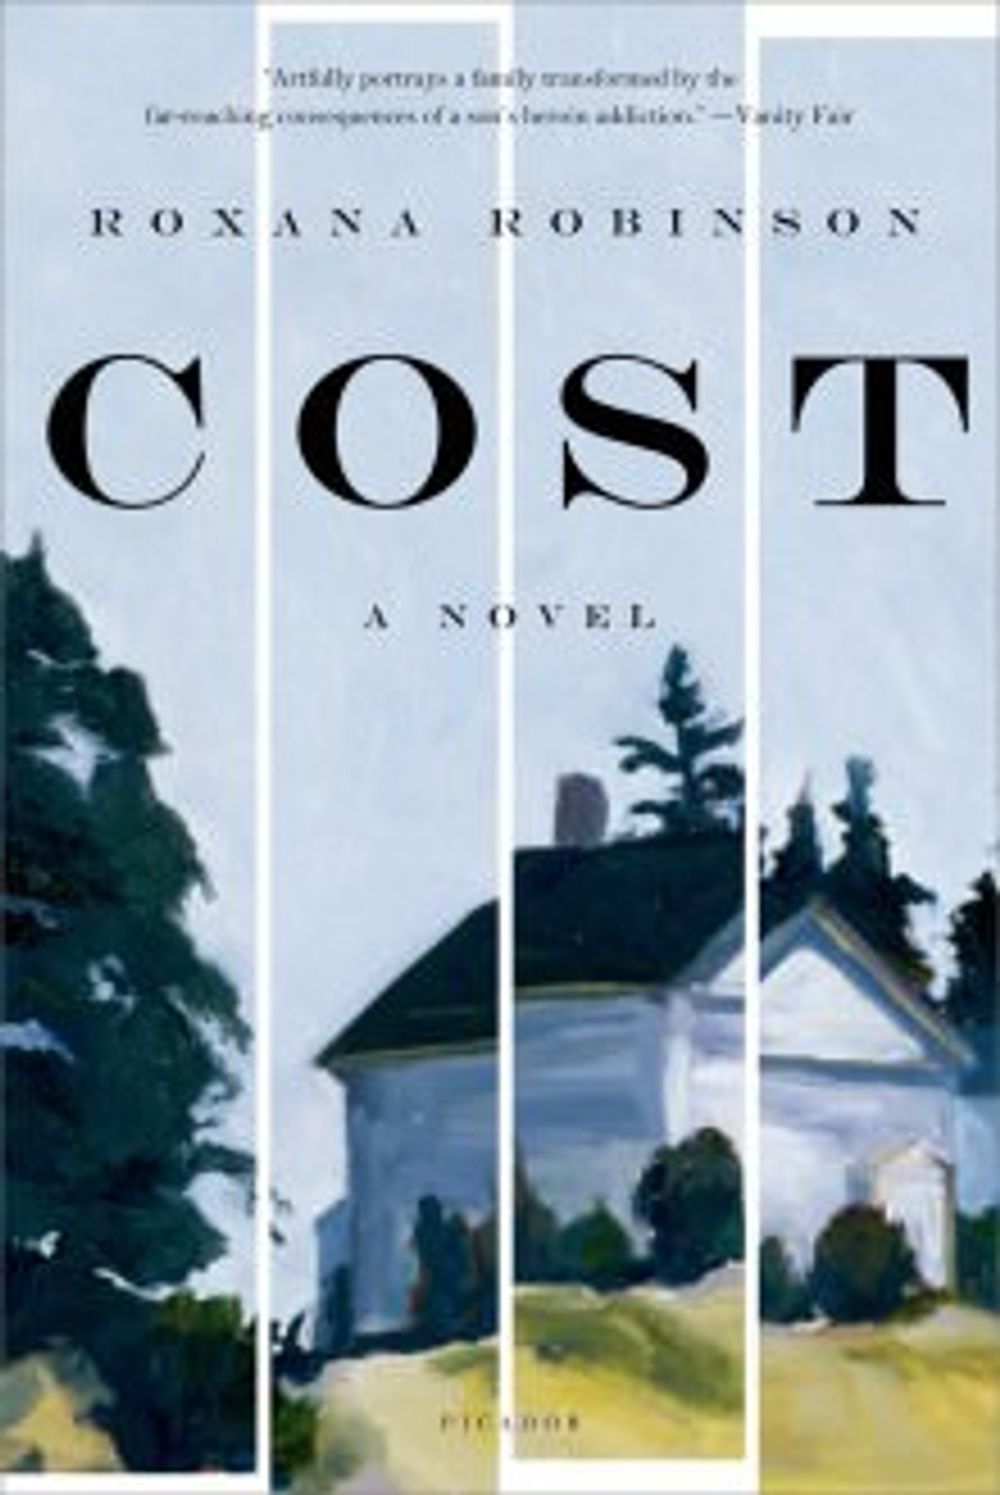 cover image of the book Cost